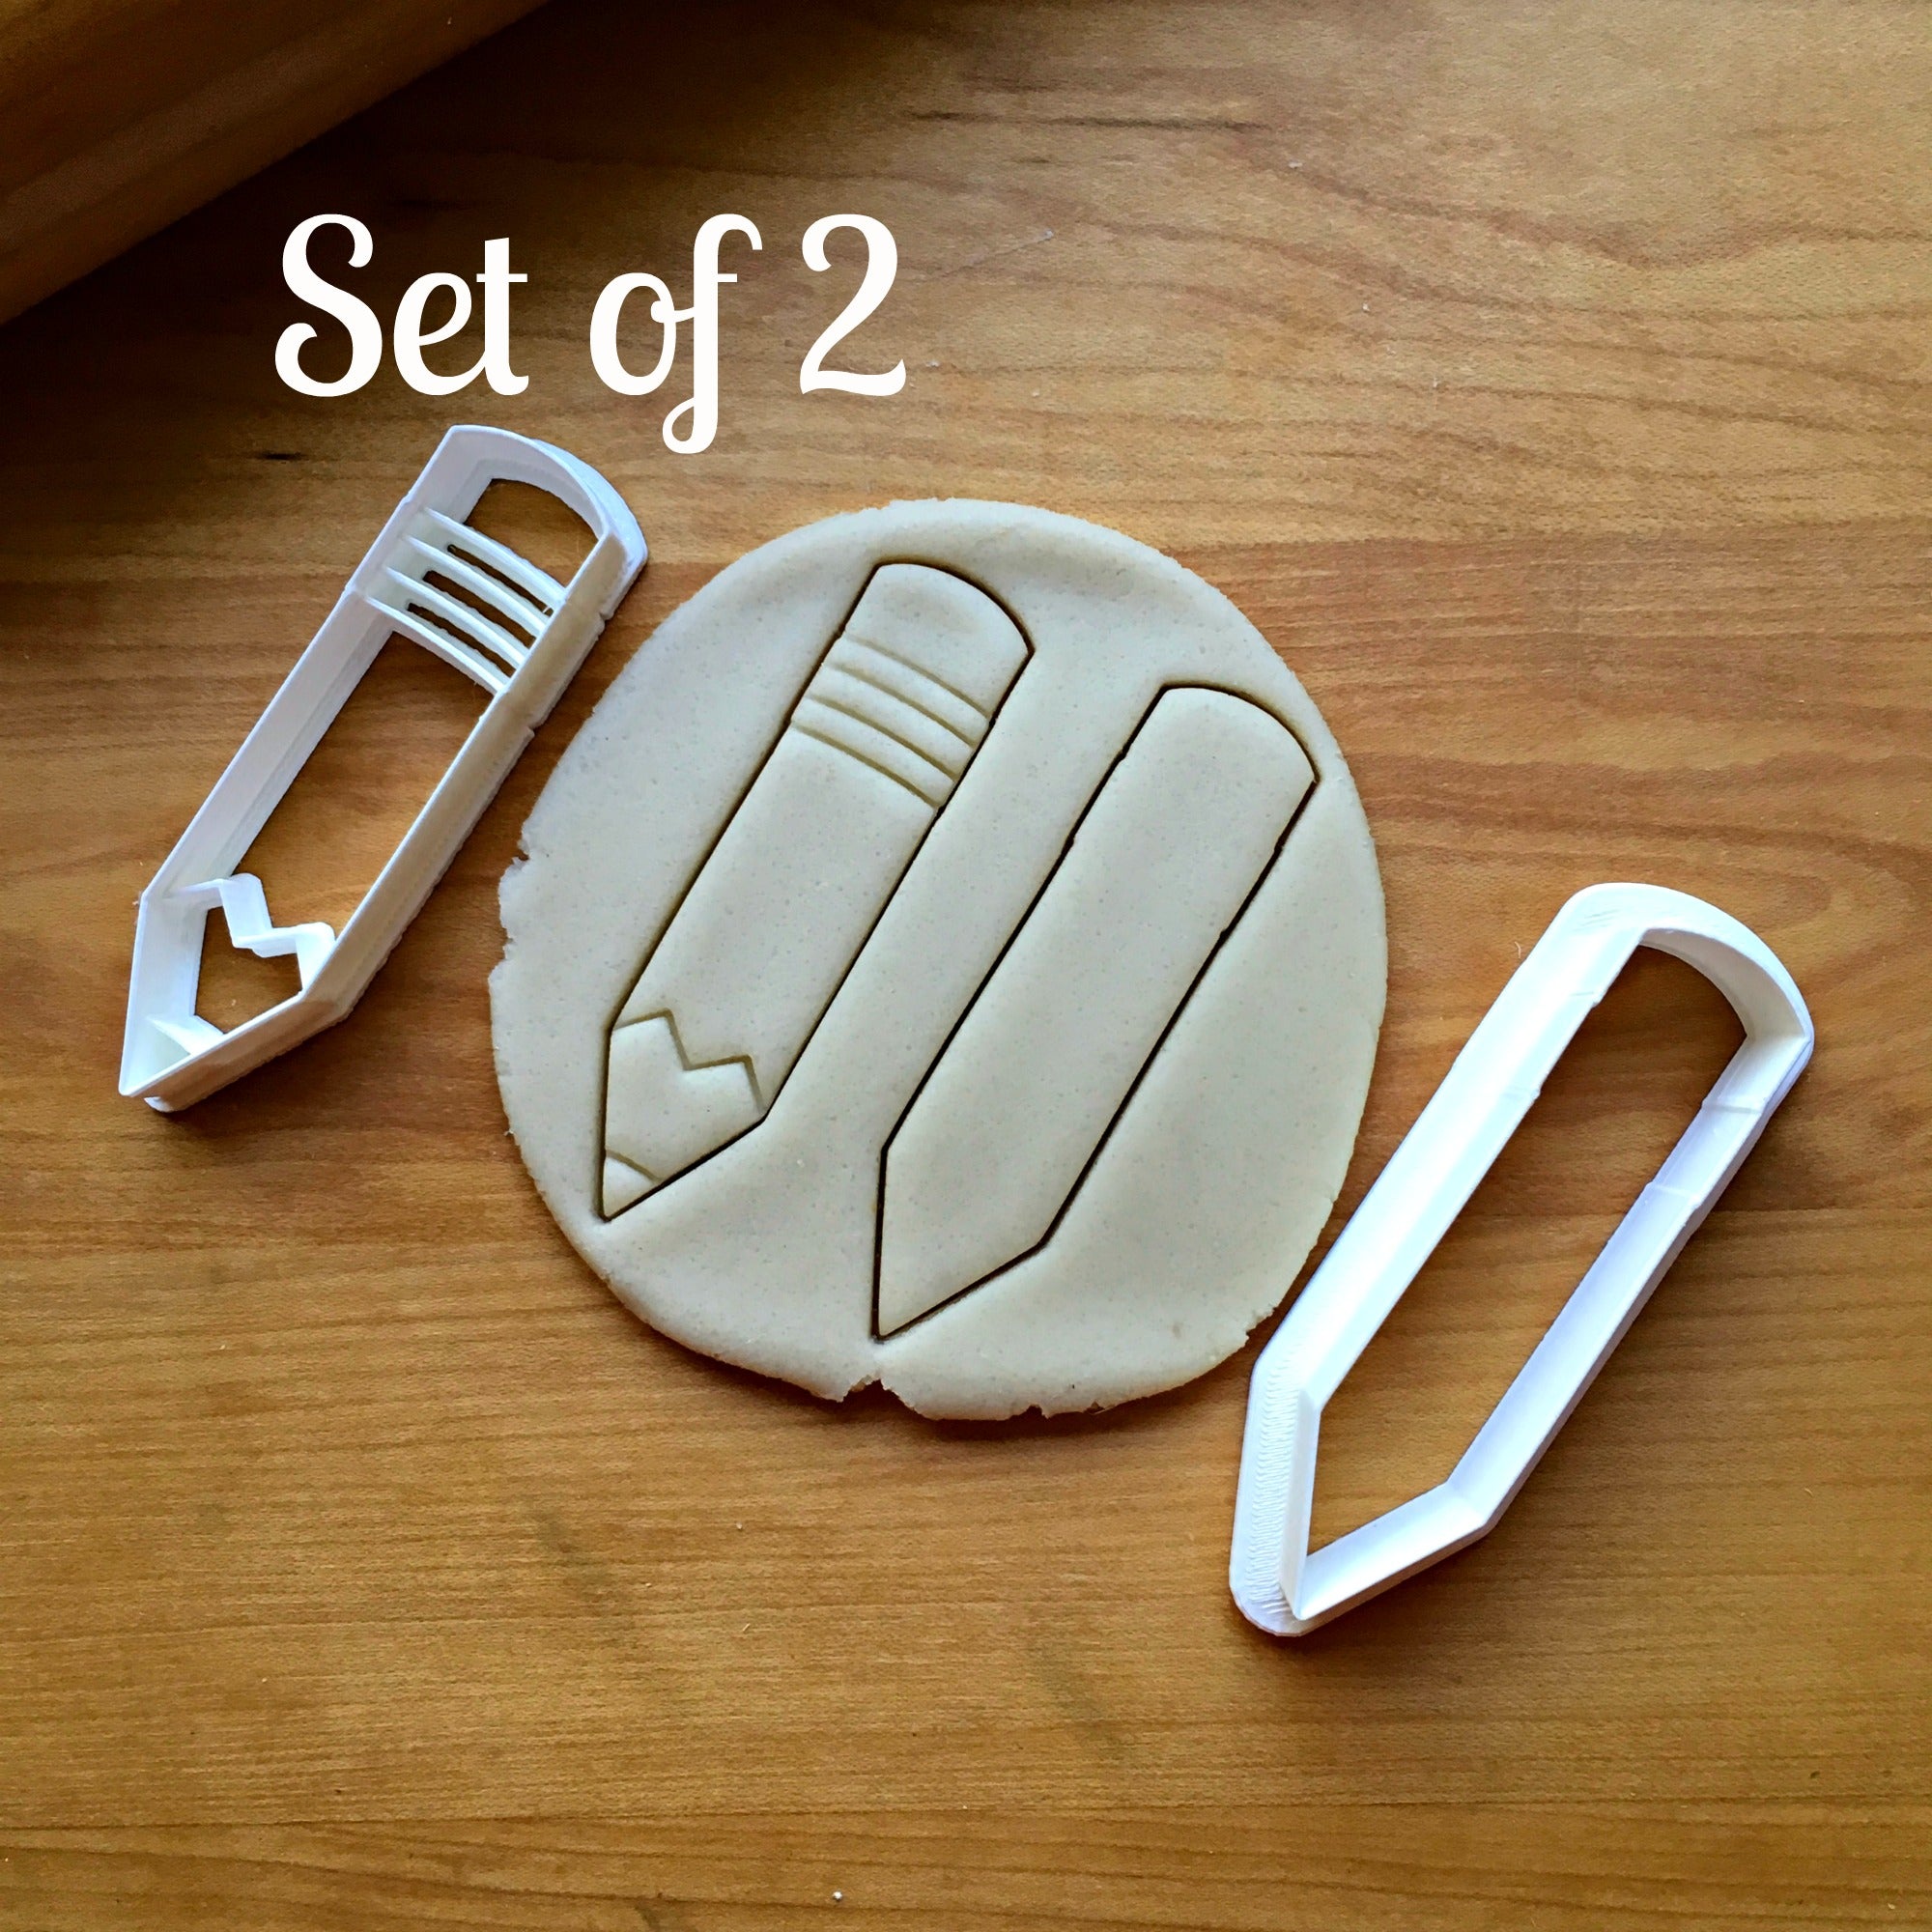 Set of 2 Skinny Pencil Cookie Cutters/Dishwasher Safe